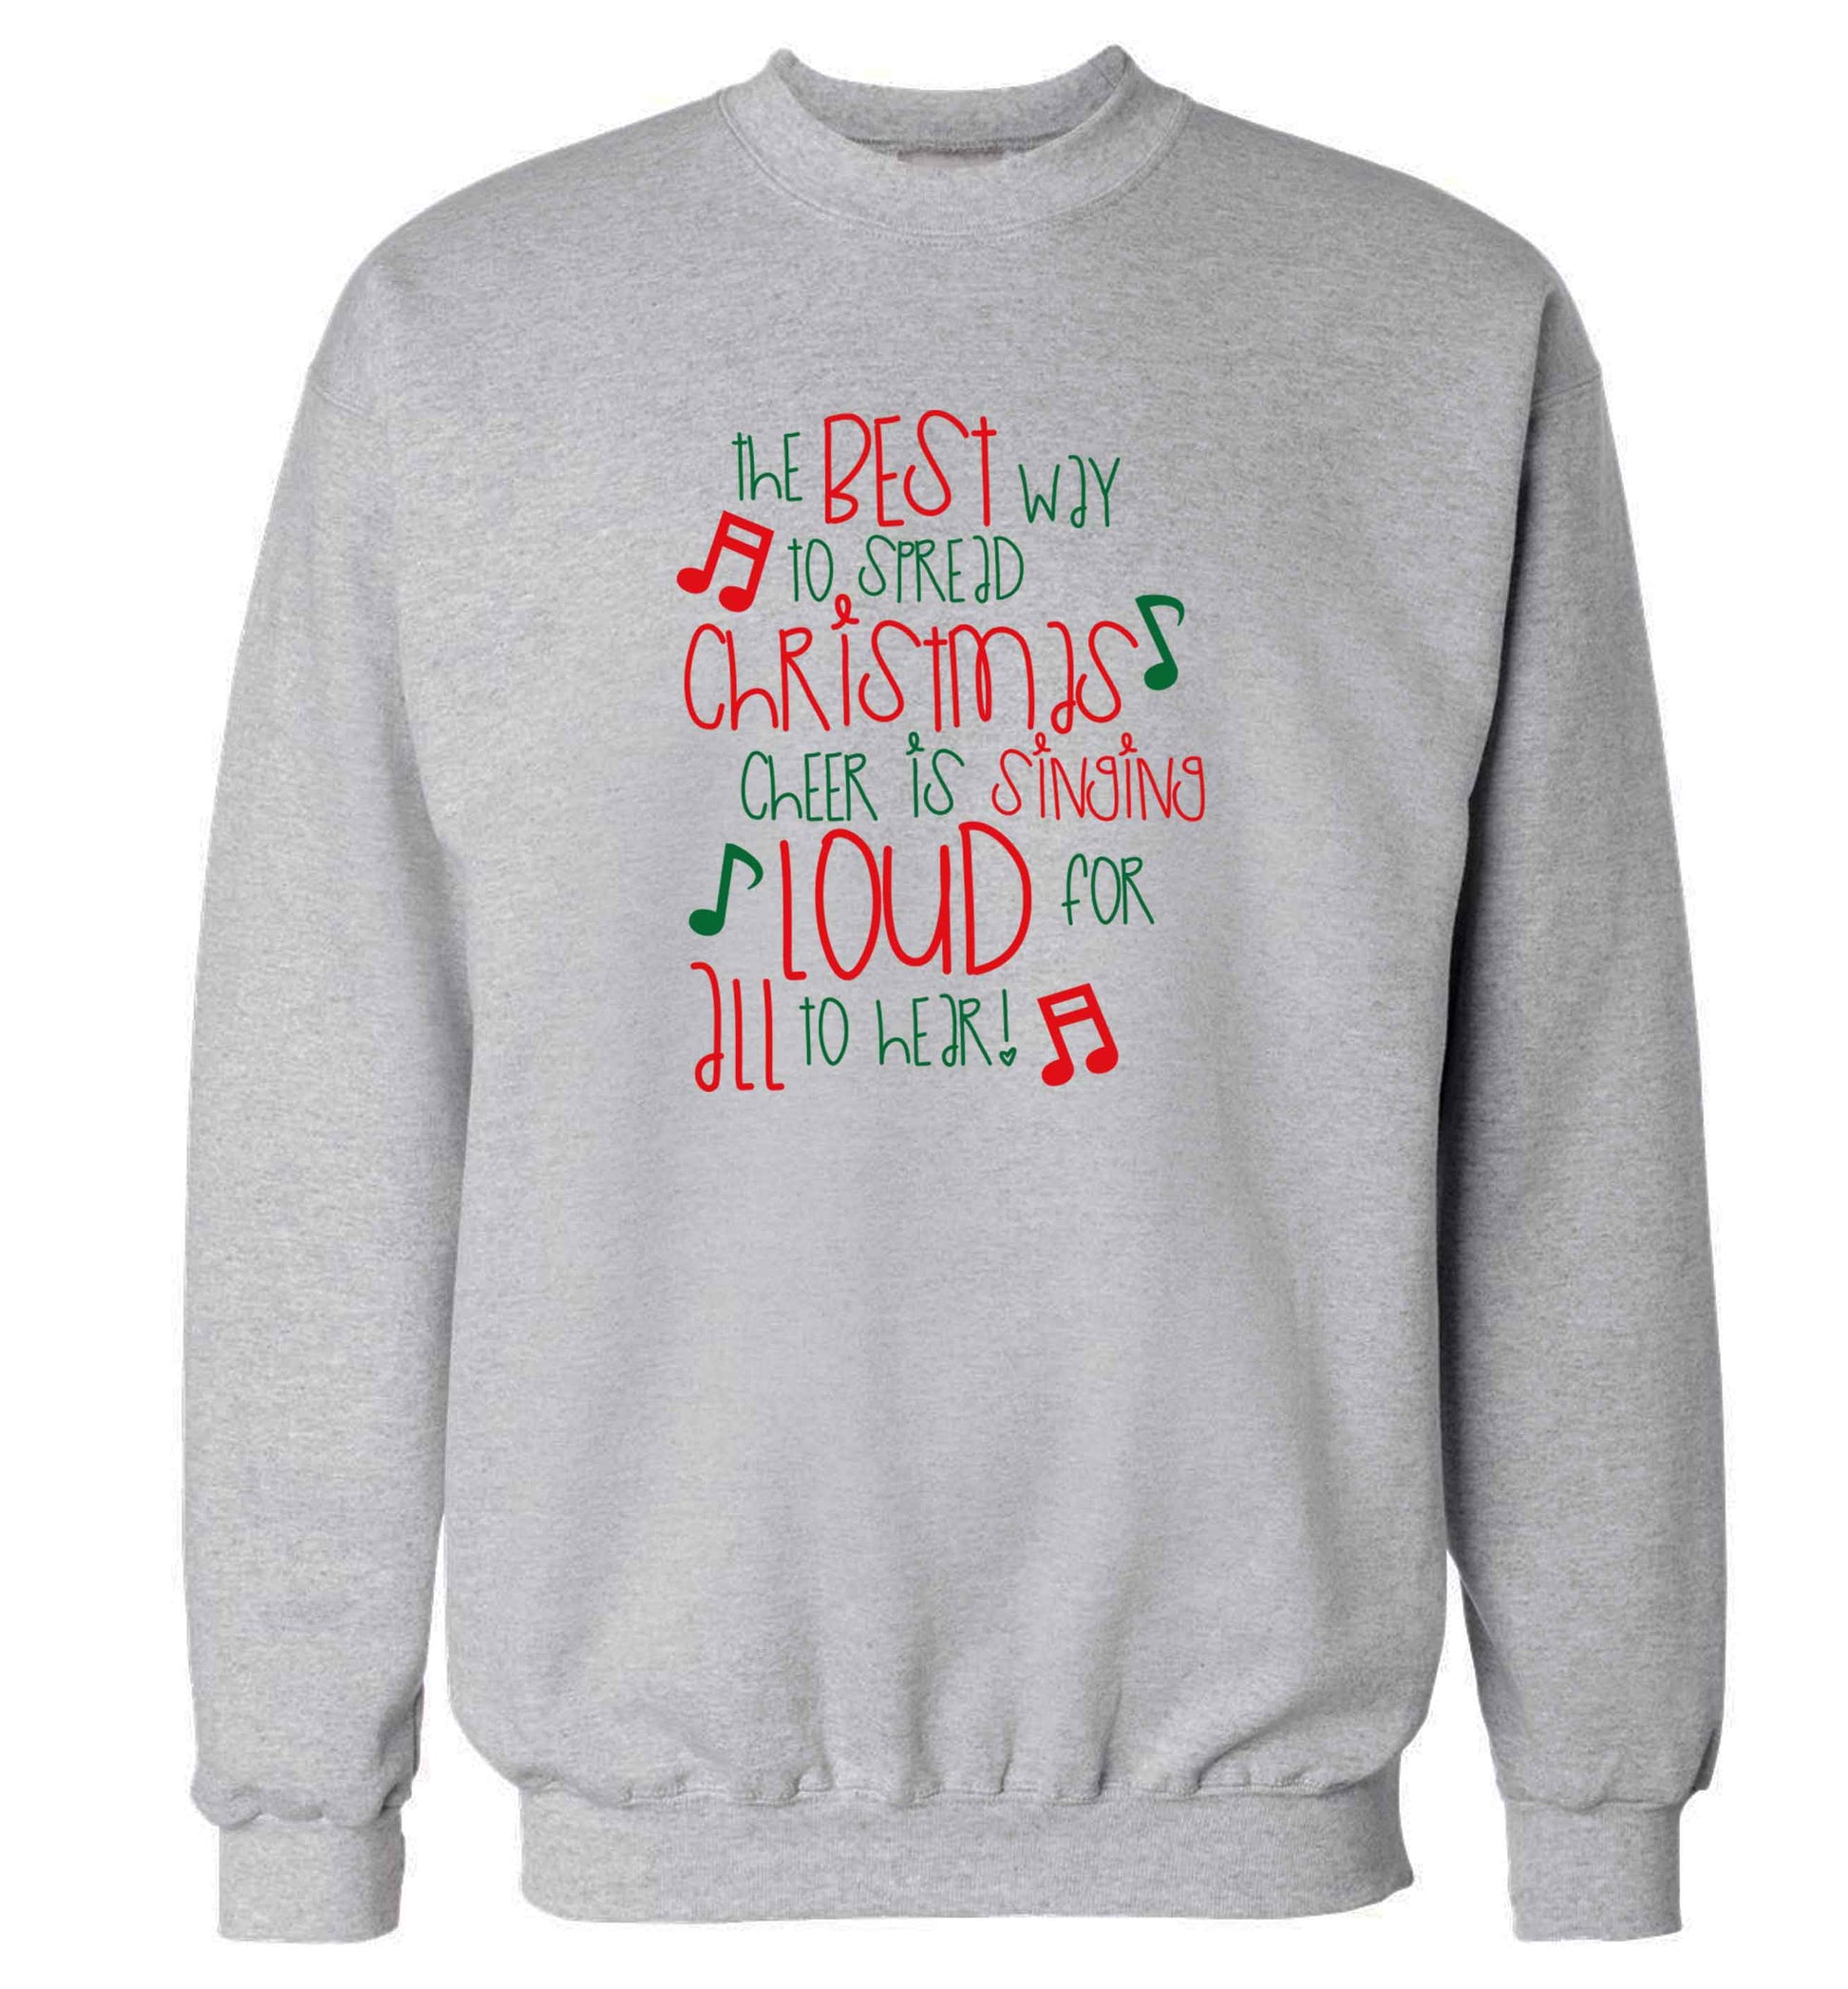 The best way to spread Christmas cheer is singing loud for all to hear adult's unisex grey sweater 2XL